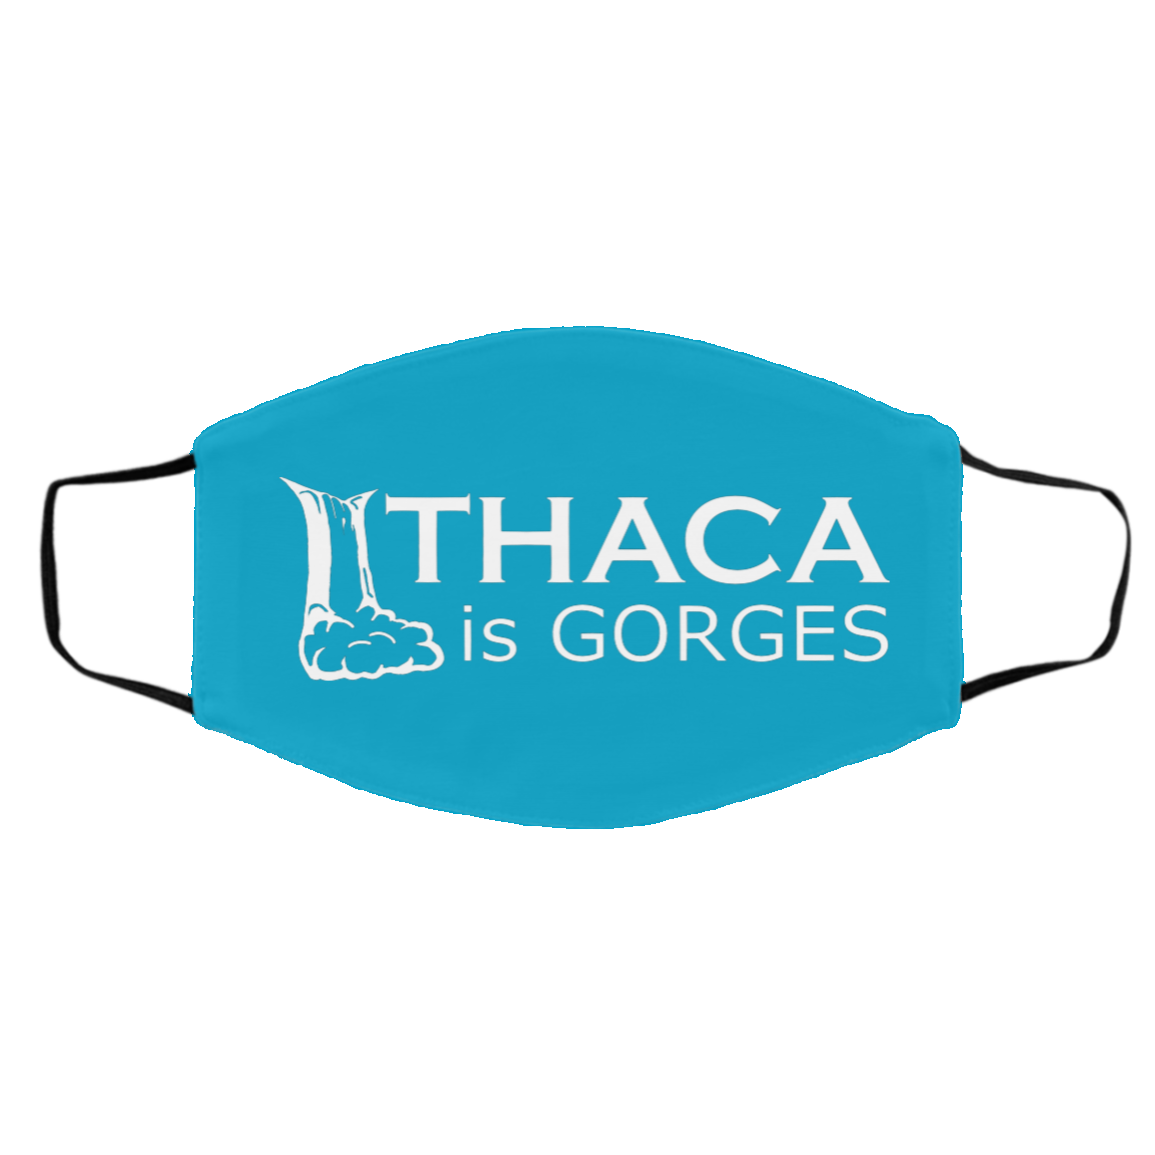 Ithaca Is Gorges - Med/Lg Face Mask (White Graphic)